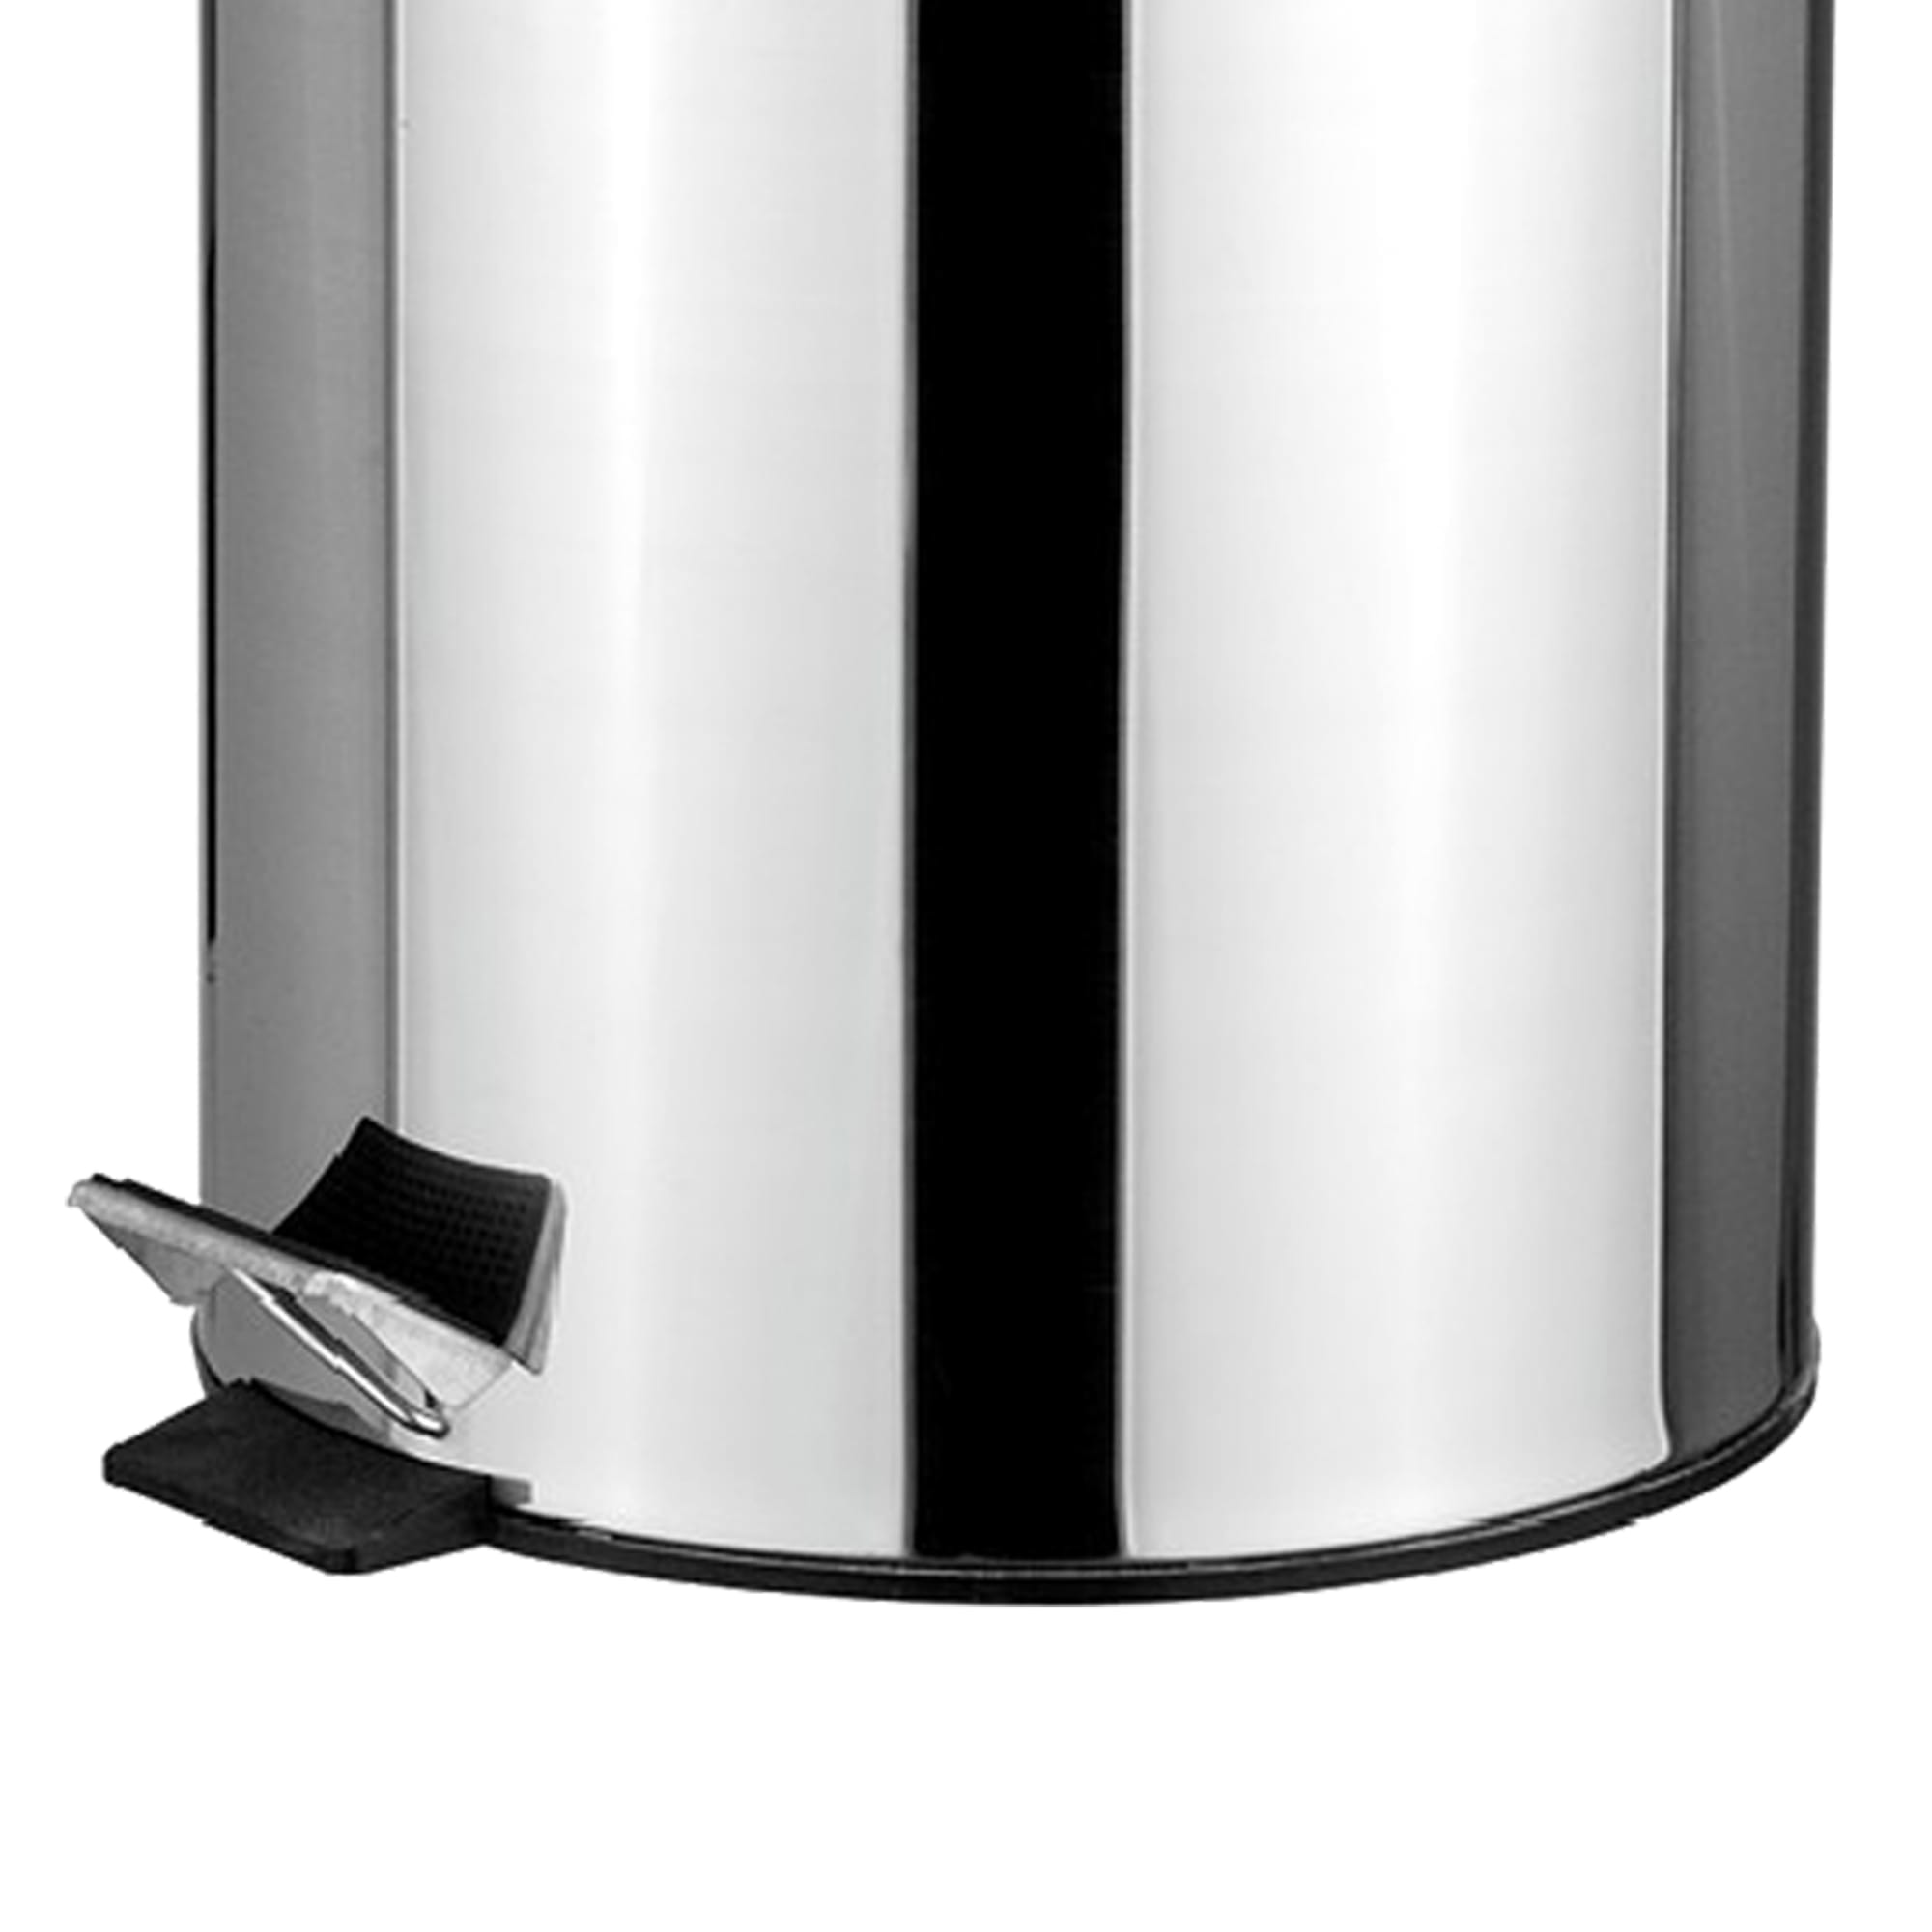 Home Basics 30 Liter Polished Stainless Steel Round Waste Bin, Silver $30.00 EACH, CASE PACK OF 2